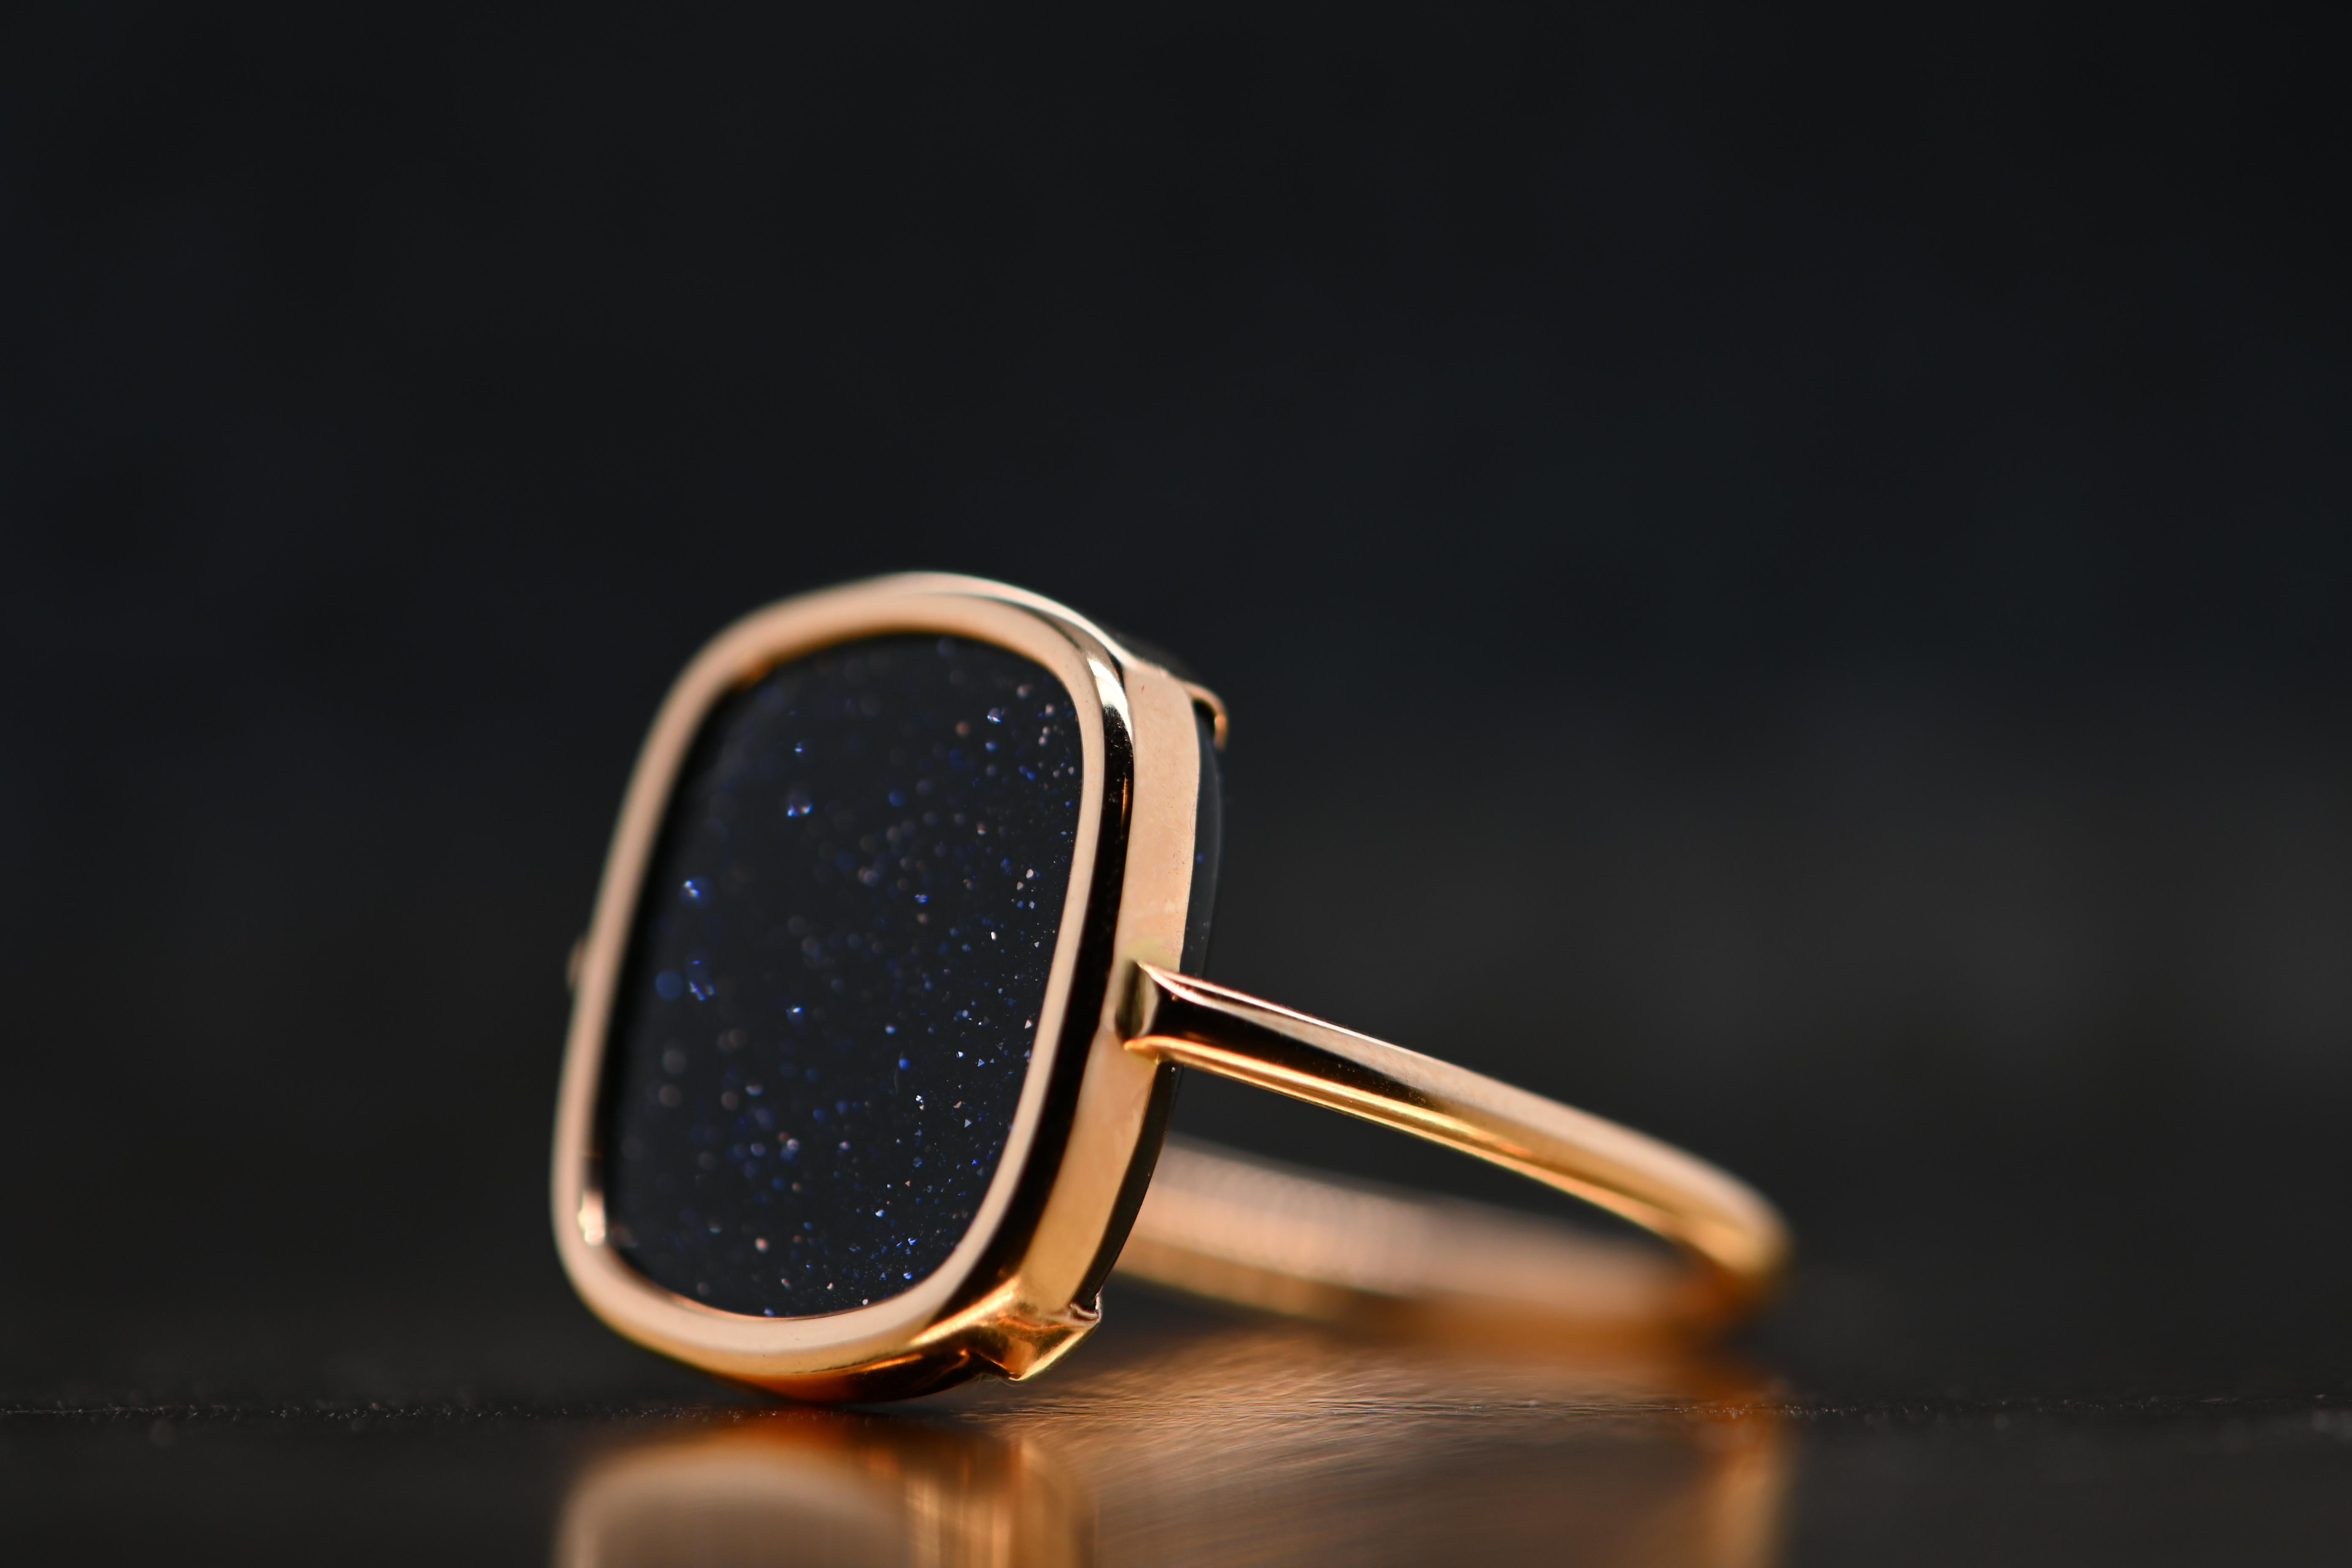 18k rose gold, with its warm and enchanting hue, adds a touch of timeless glamor to this precious work of art. Crafted with exquisite attention to detail, this ring strikes the perfect balance between tradition and modernity, paying homage to the